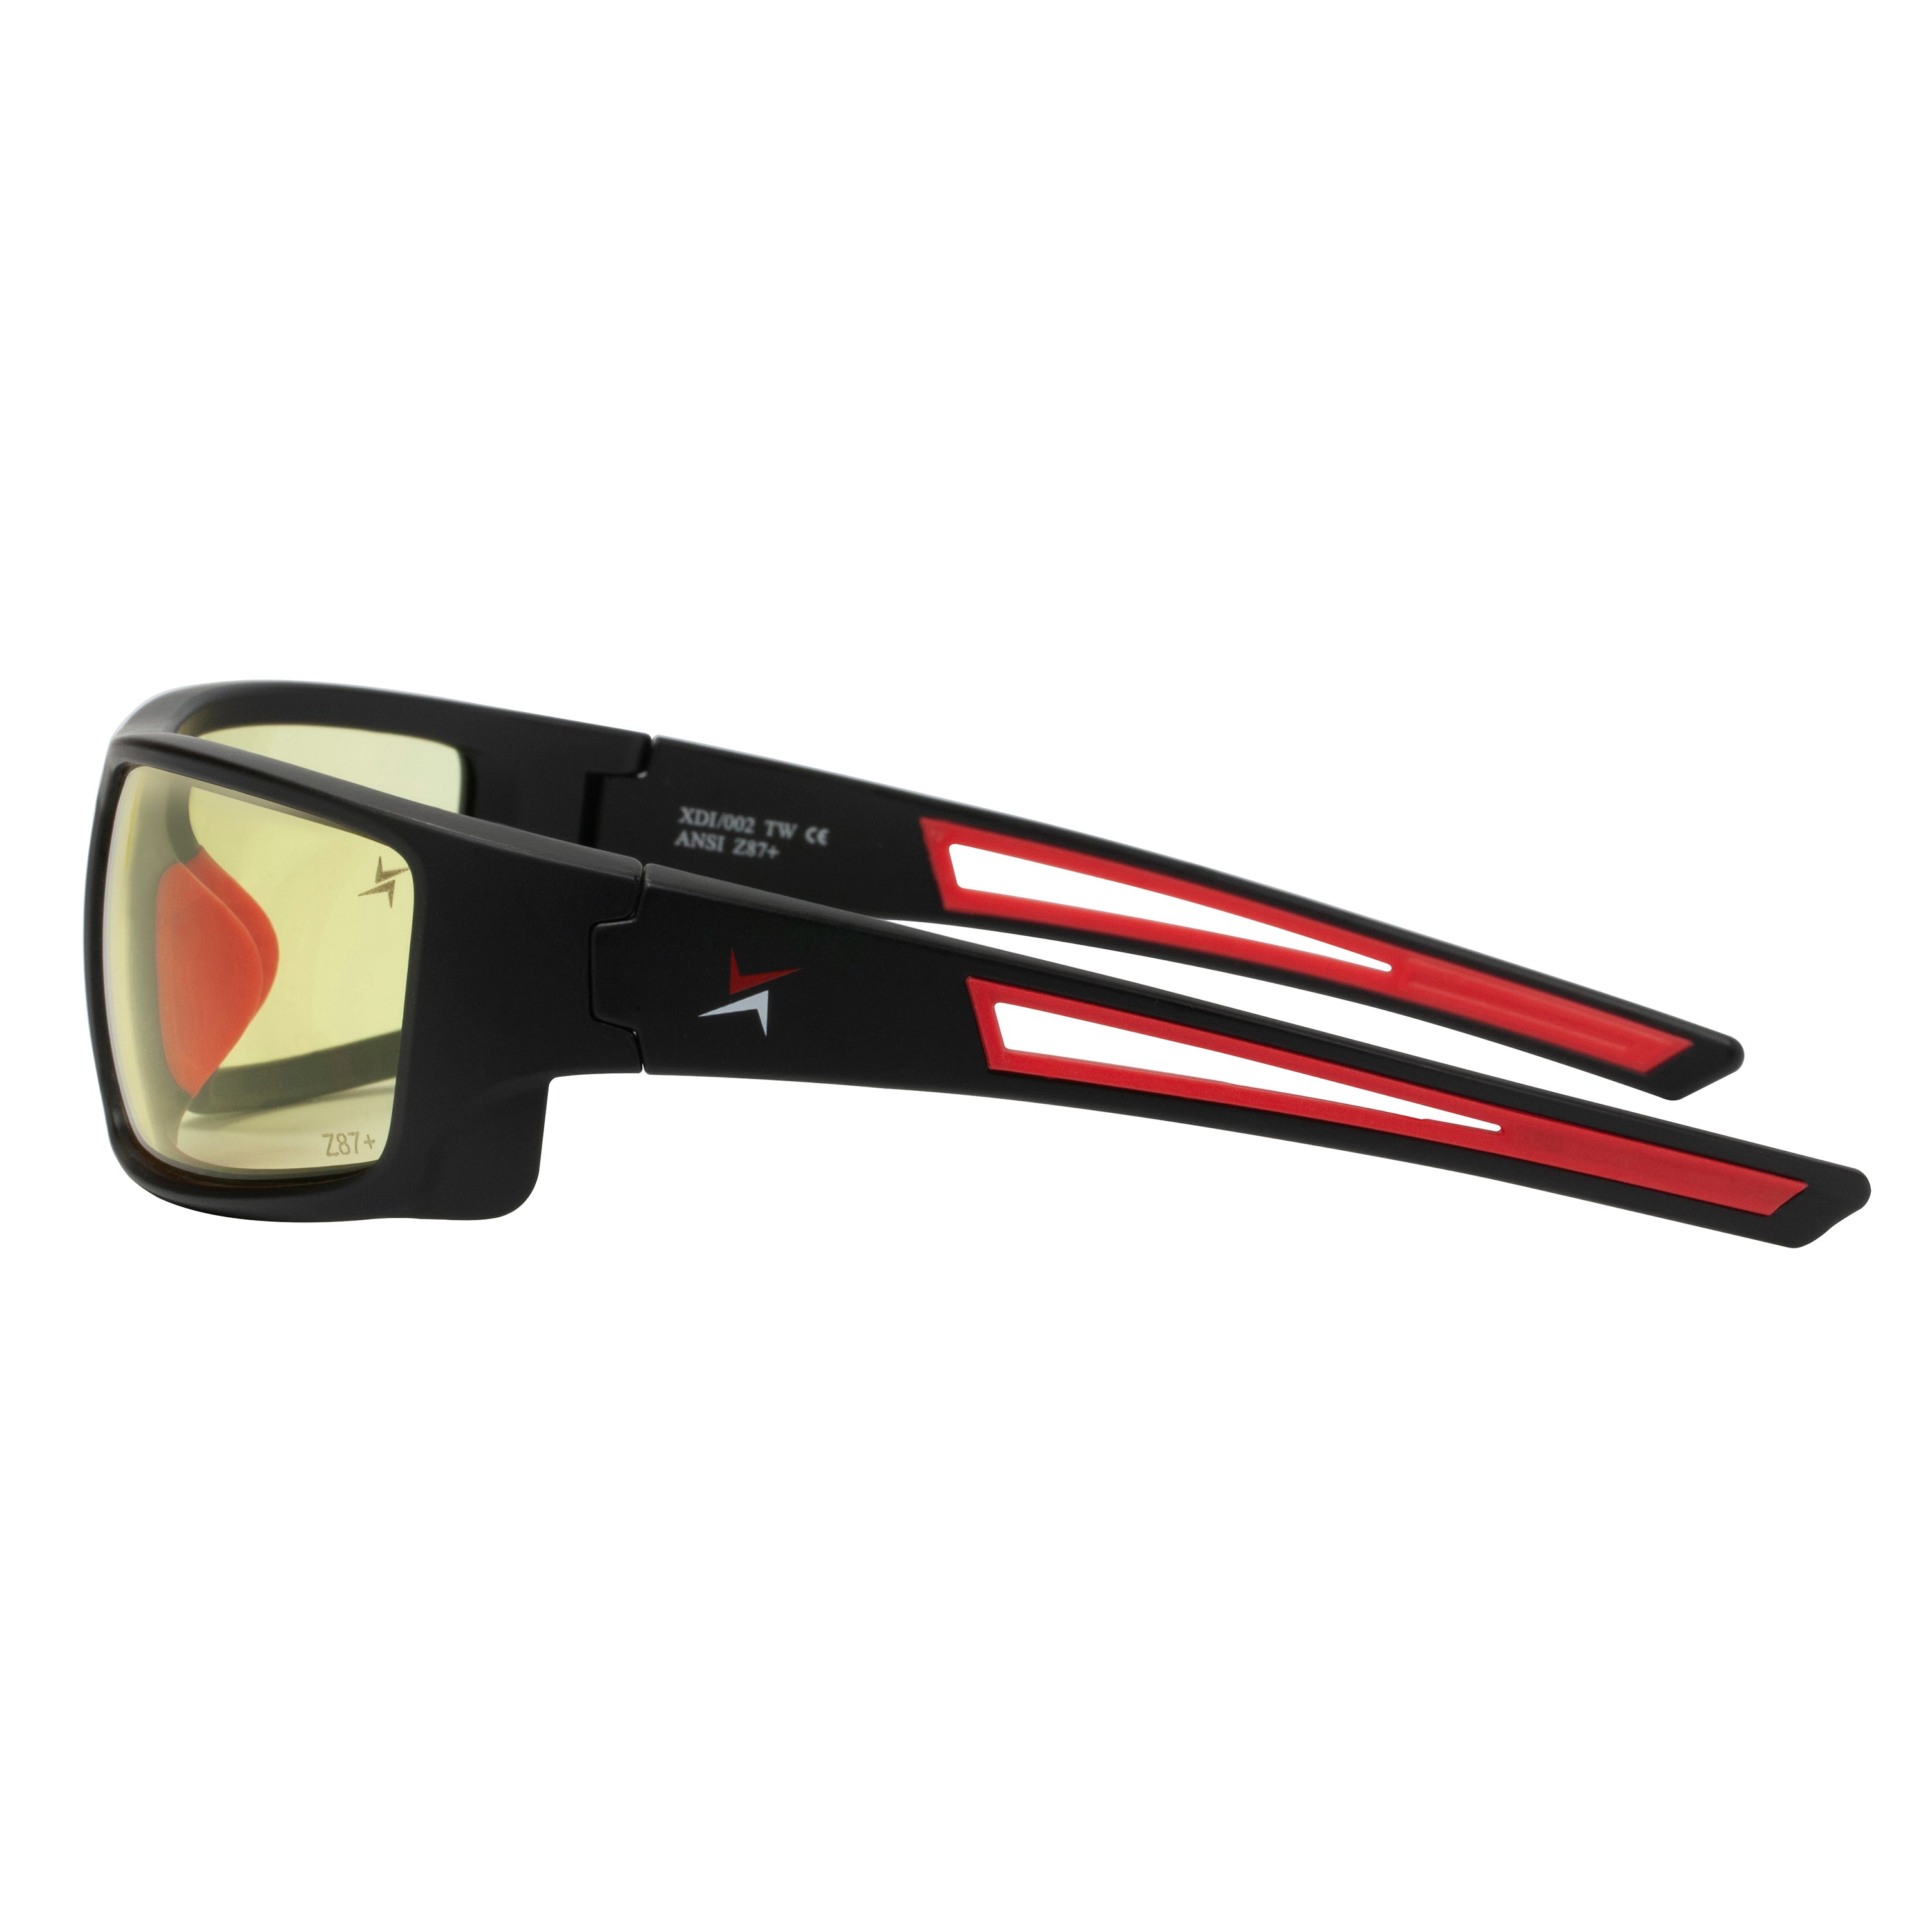 Yellow Tint Lens Sport Safety Sunglasses with Red Rubber Accents.